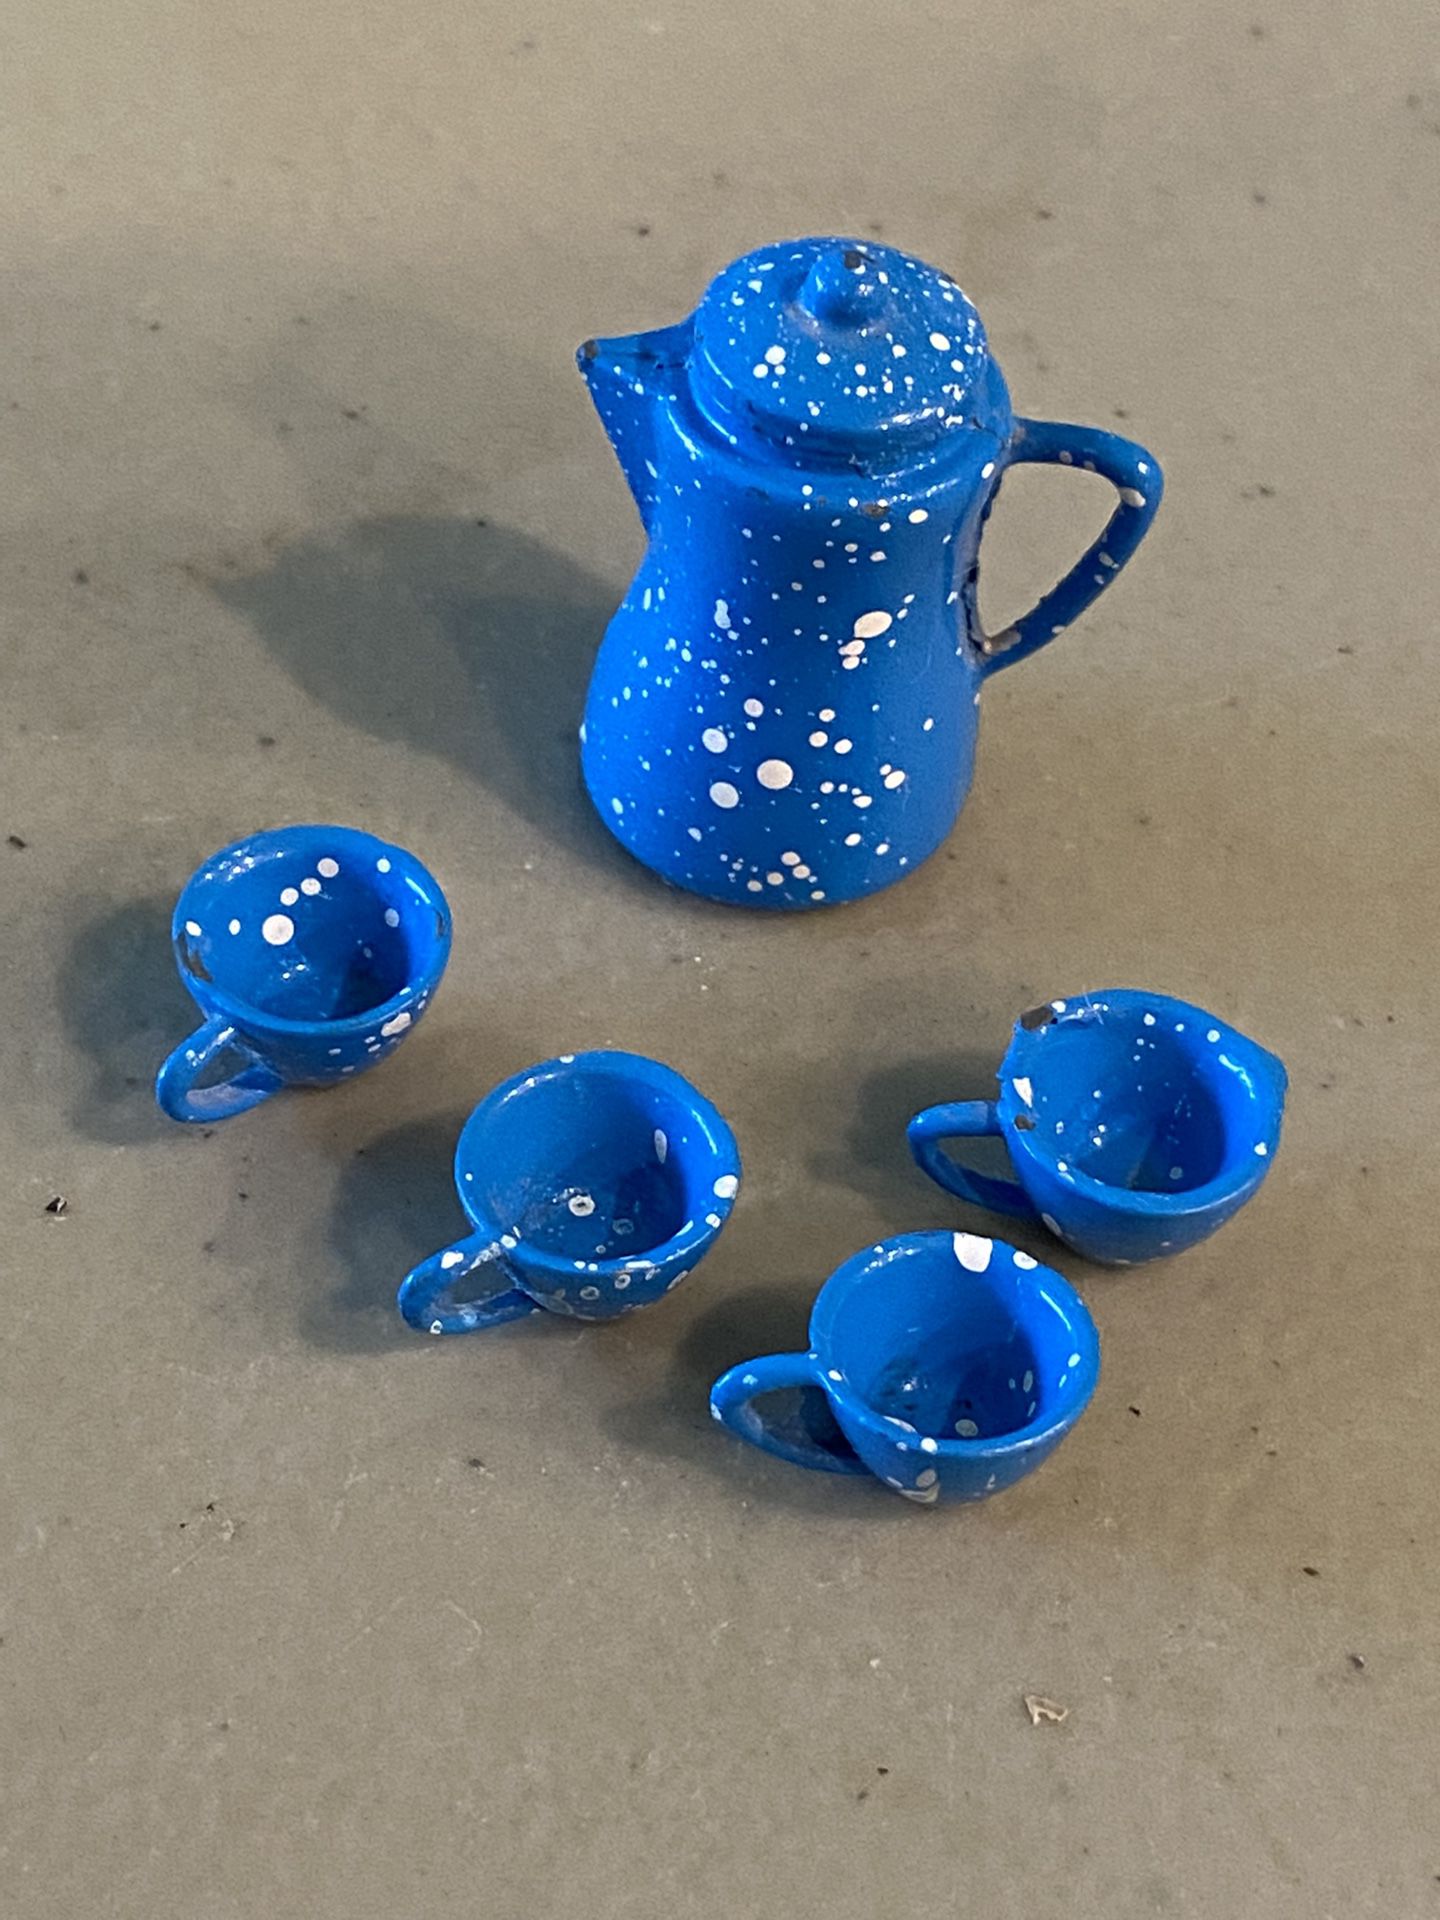 Vintage Miniature Blue Enamel Spatterware Metal Coffee Tea Pot & 4 Cups Dollhouse sized. Made of metal. Teapot is approximately 1” tall